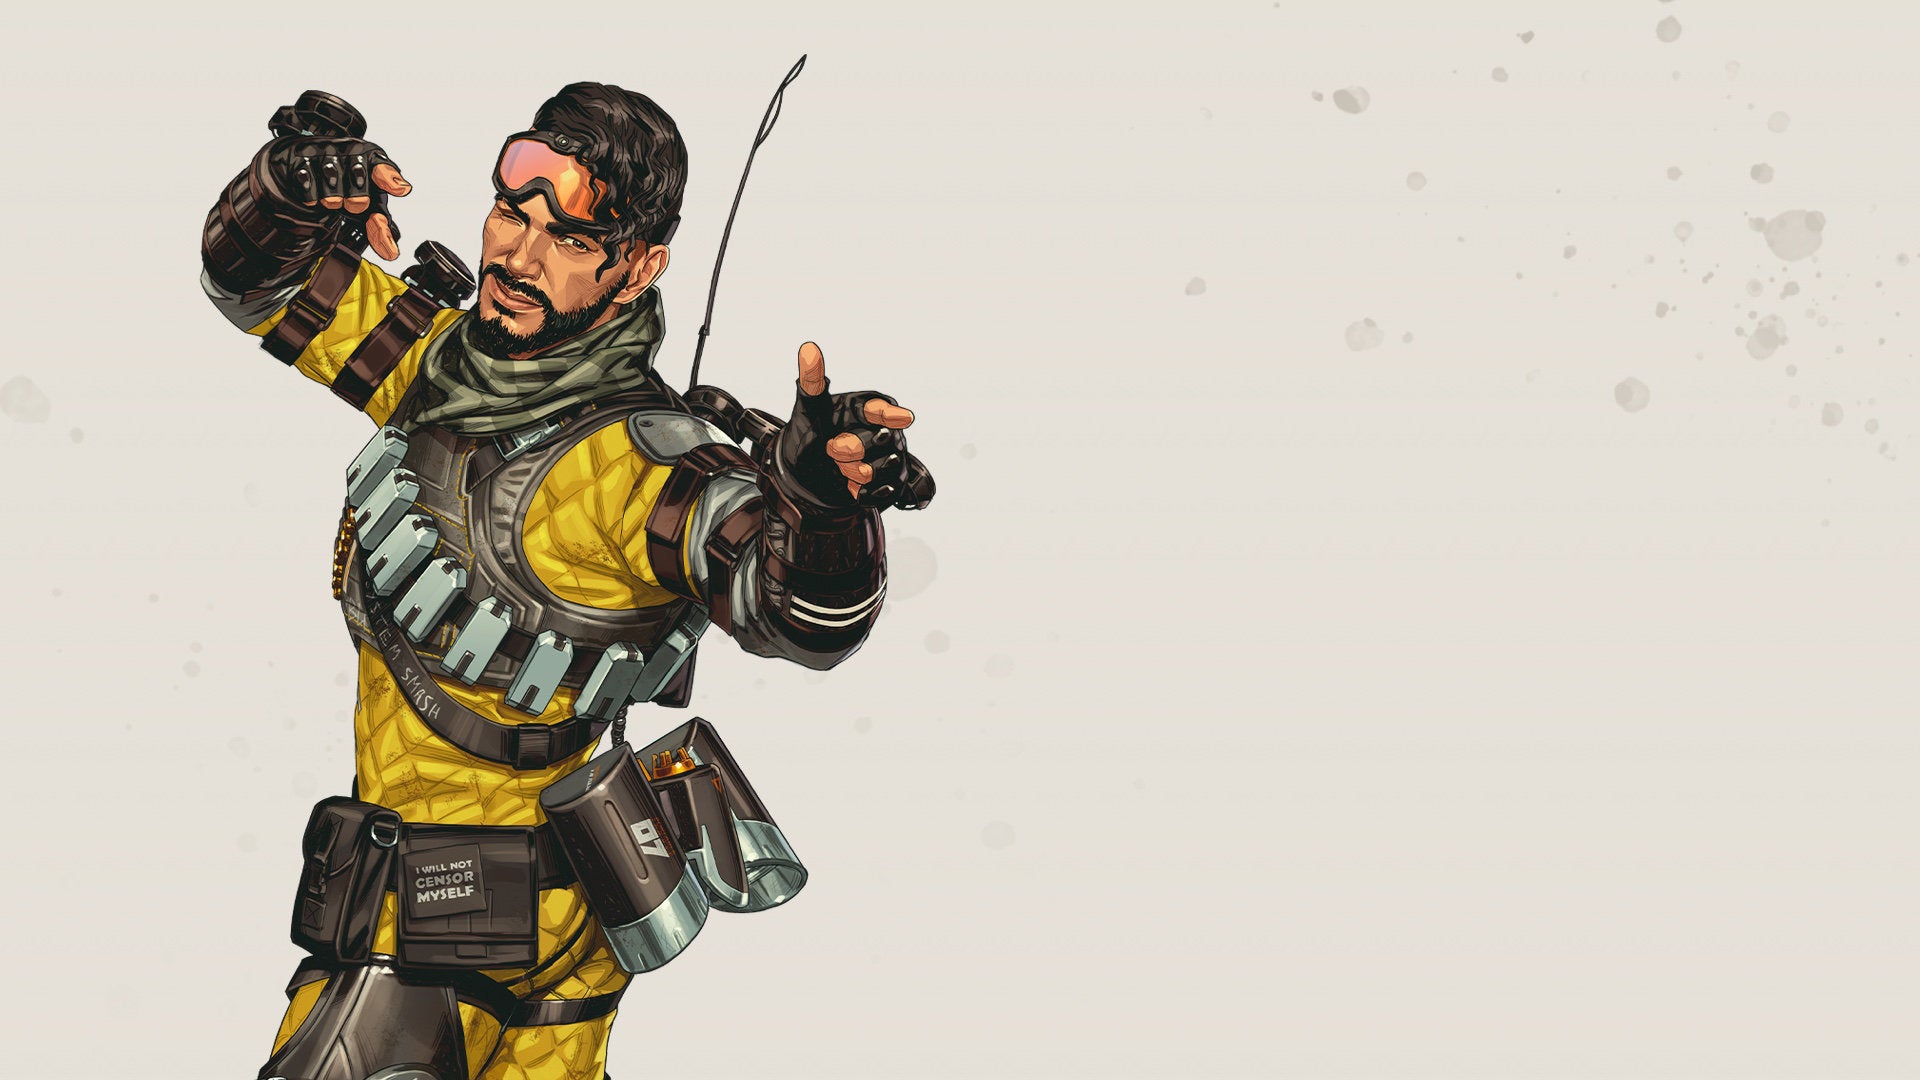 Official art of Mirage, one of the Apex Legends characters.